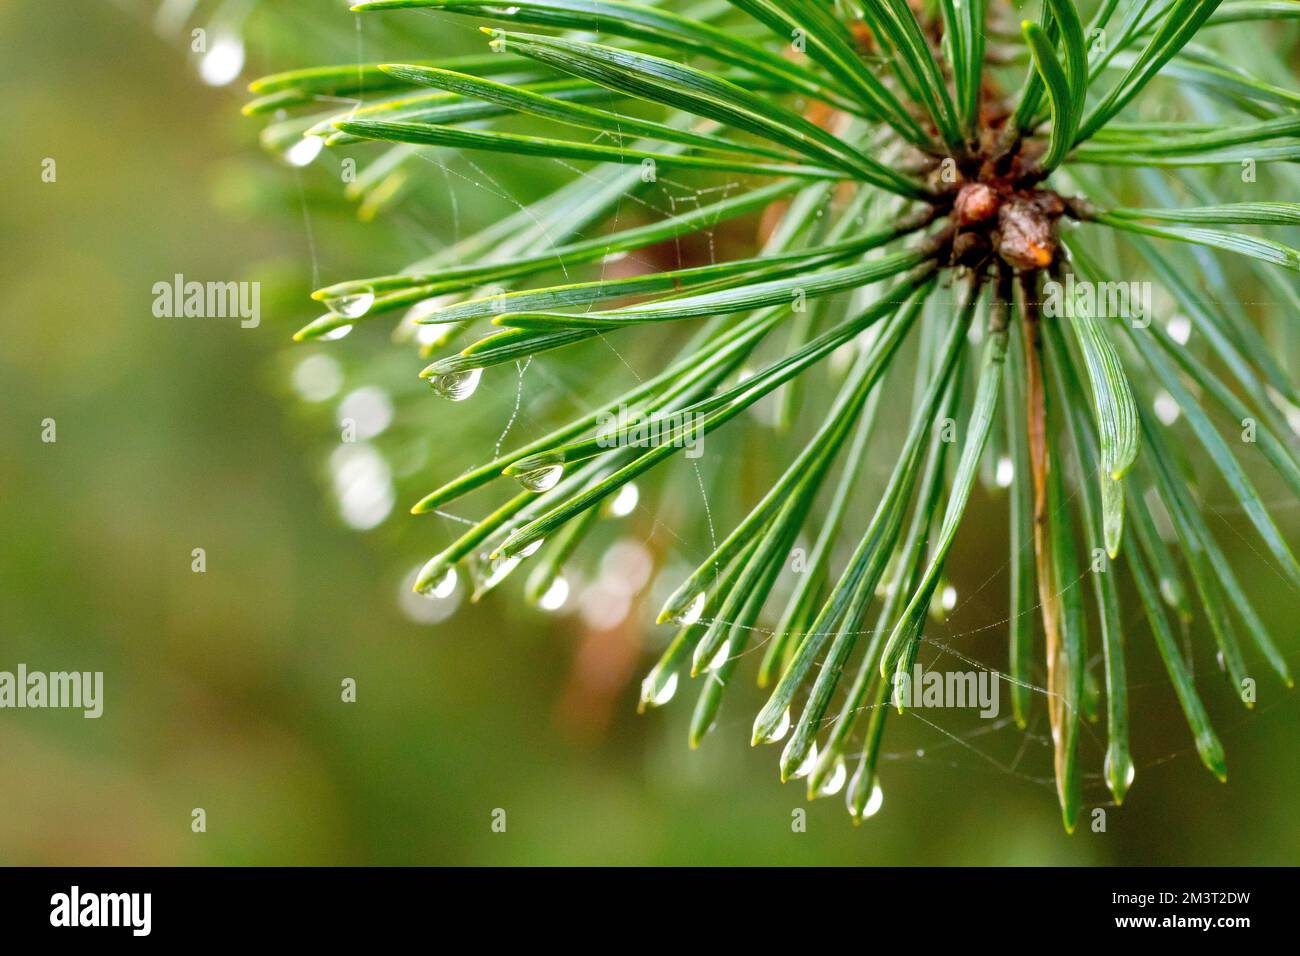 Scot's Pine (pinus sylvestris), close up showing the green needles of the tree on a misty day with water droplets forming at the ends. Stock Photo